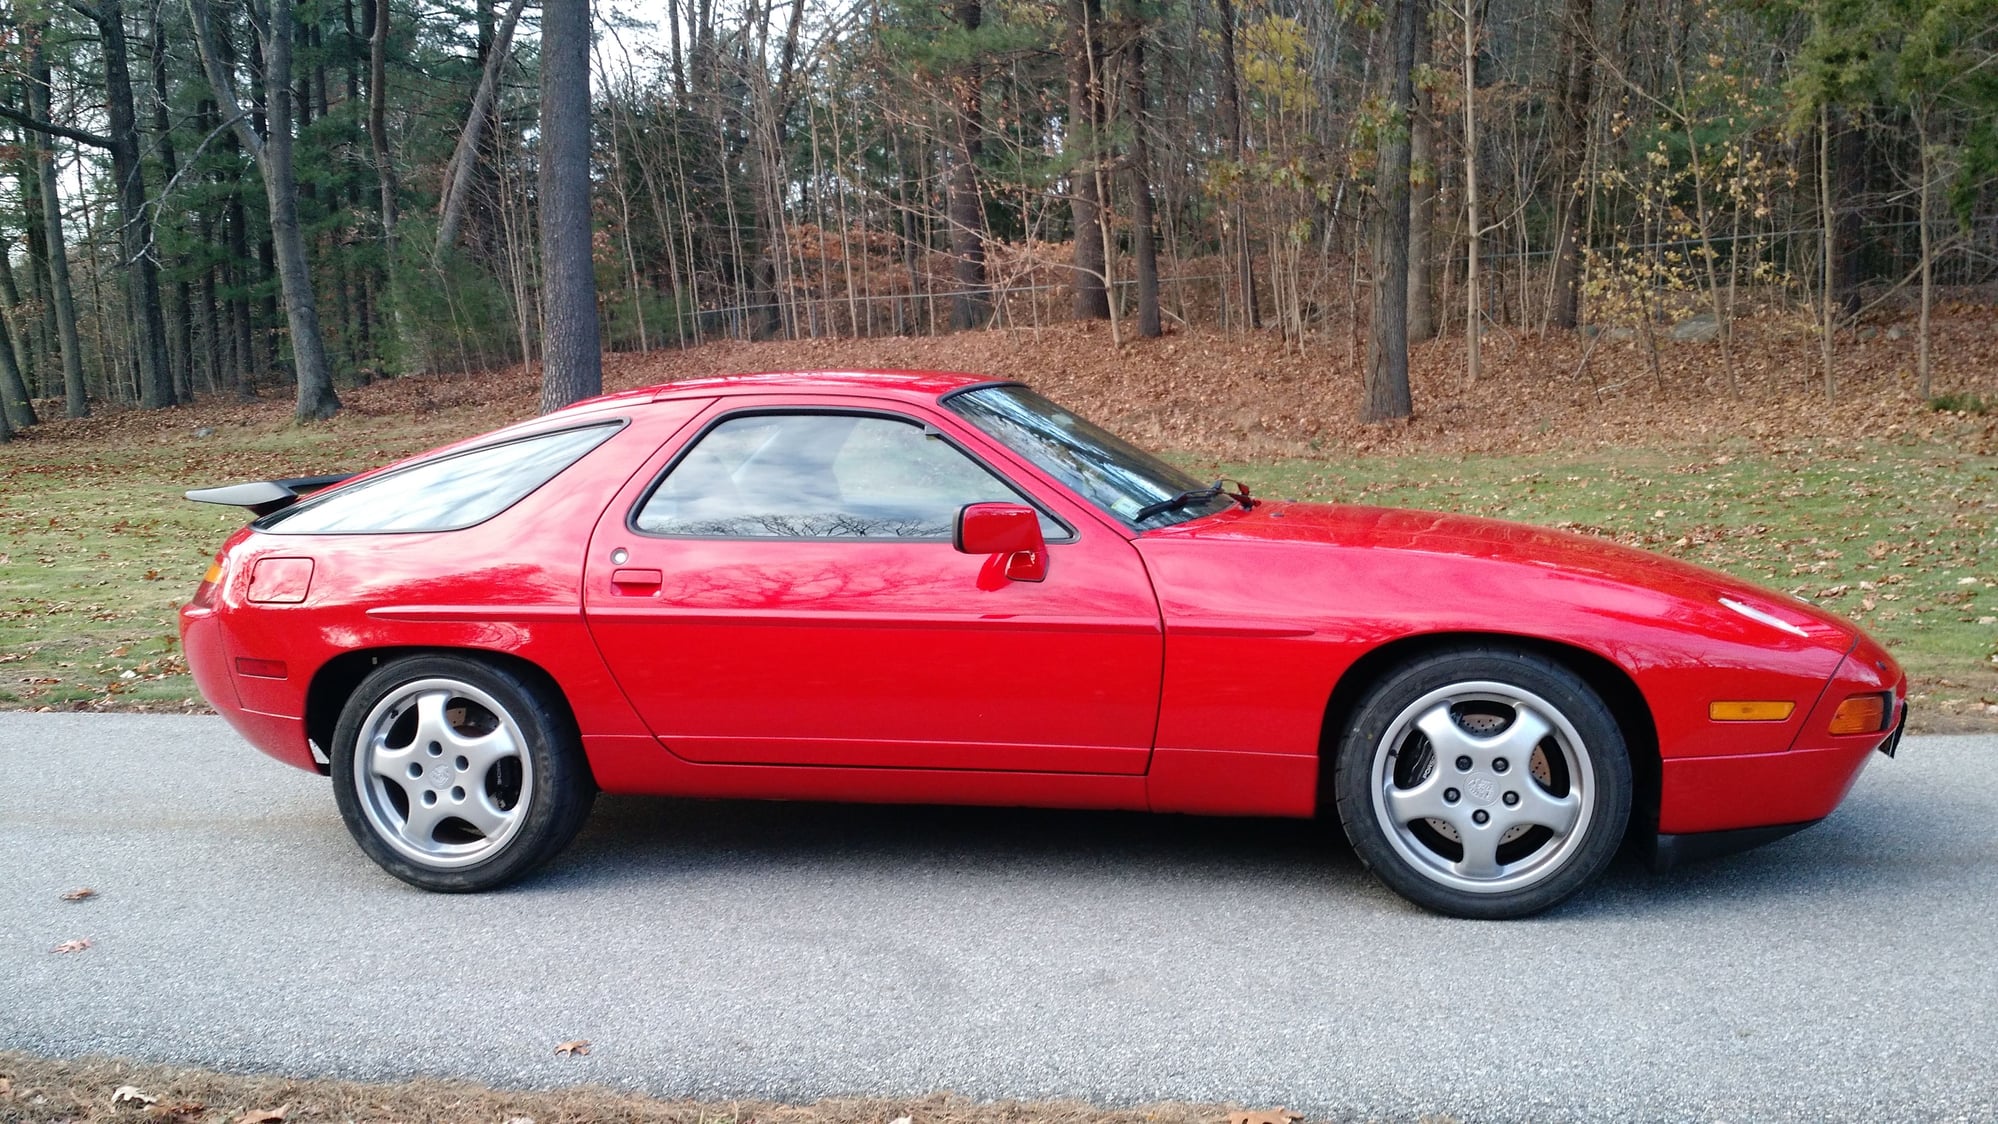 1987 Porsche 928 - 1987 Porsche 928 S4 5spd Manual - Used - VIN WP0JB0924HS860292 - 50,942 Miles - 8 cyl - 2WD - Manual - Coupe - Red - Bedford, MA 01730, United States